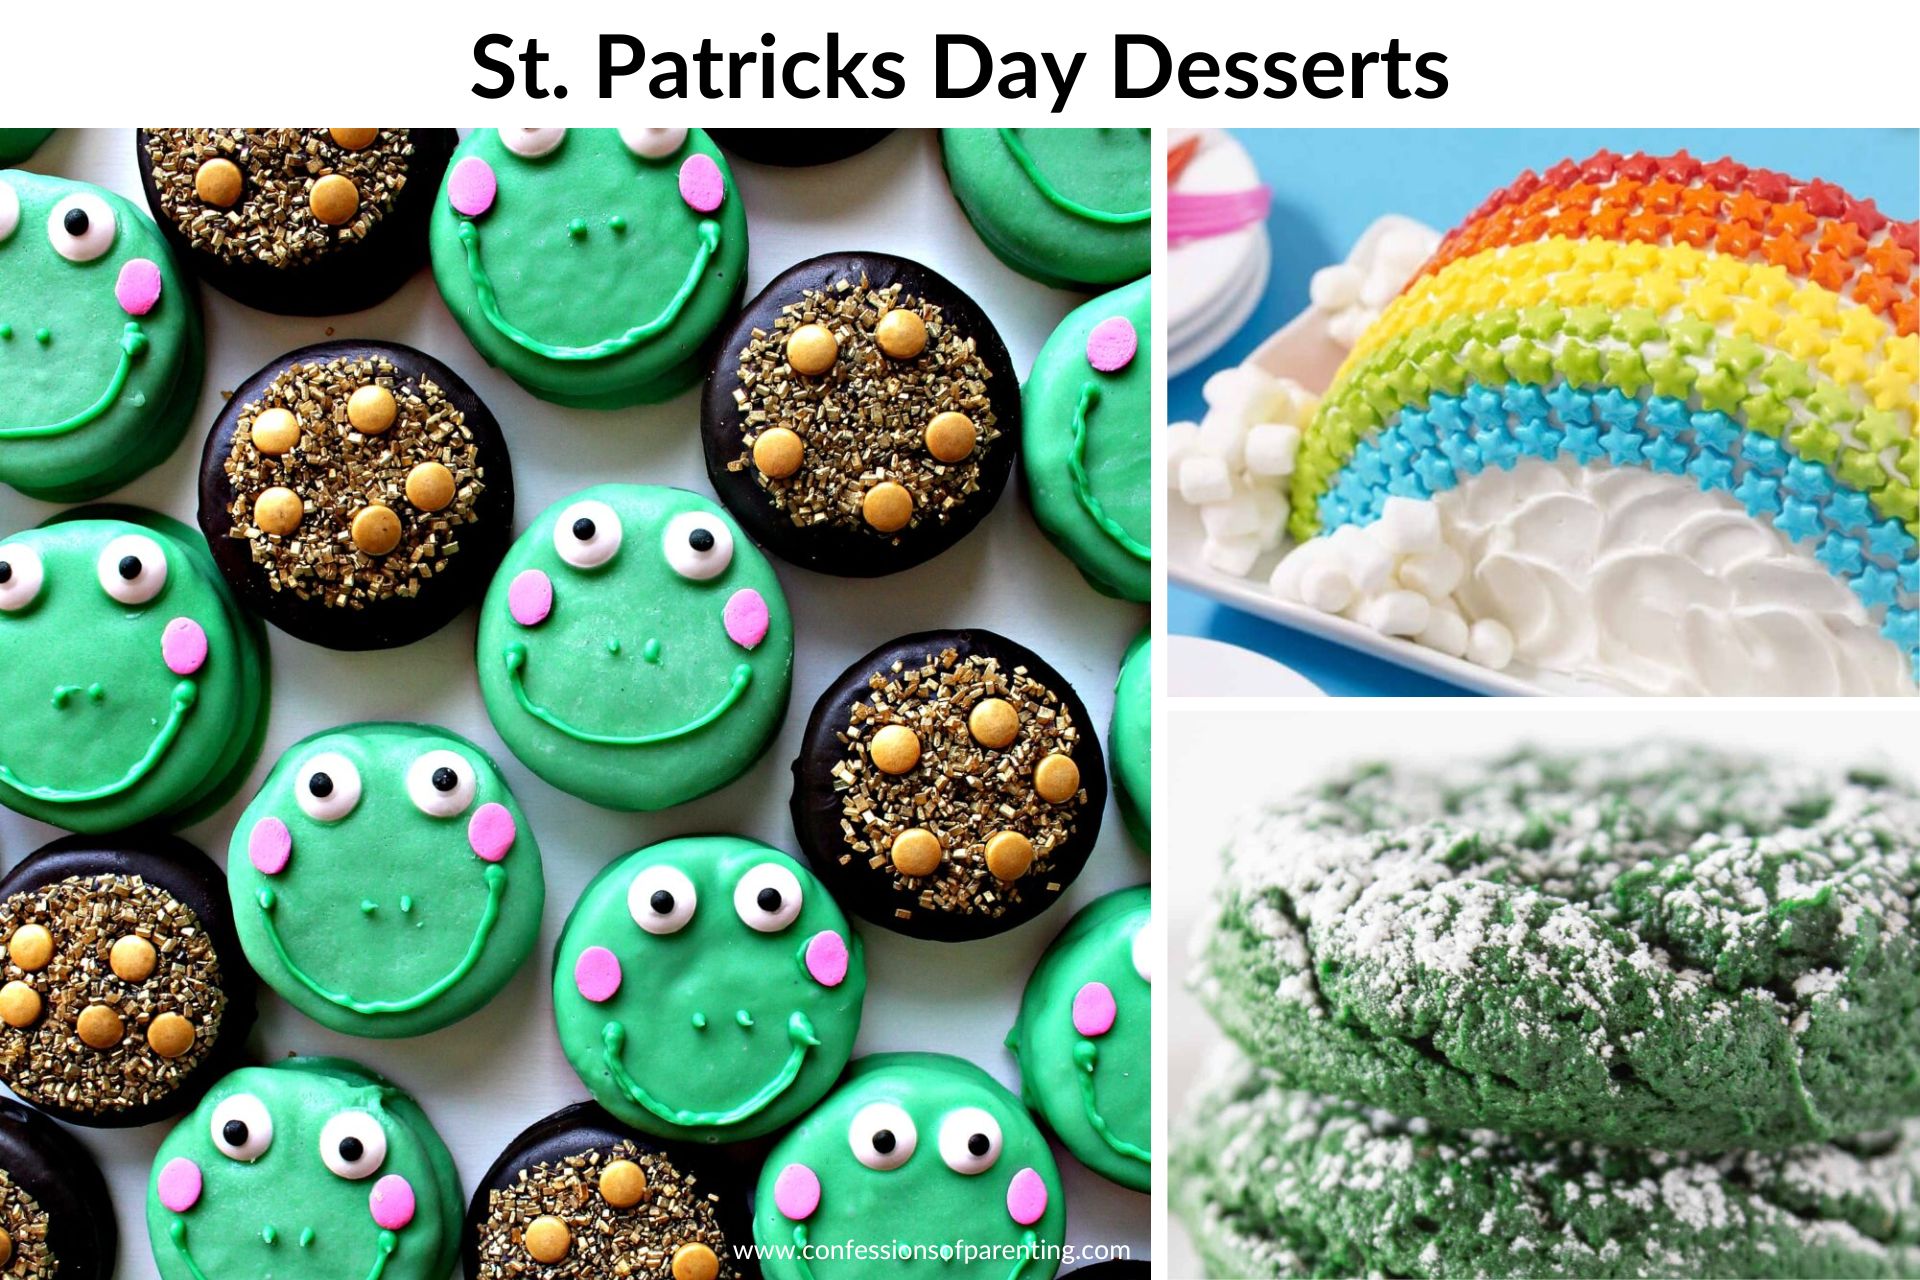 St.Patricks Day desserts featured images